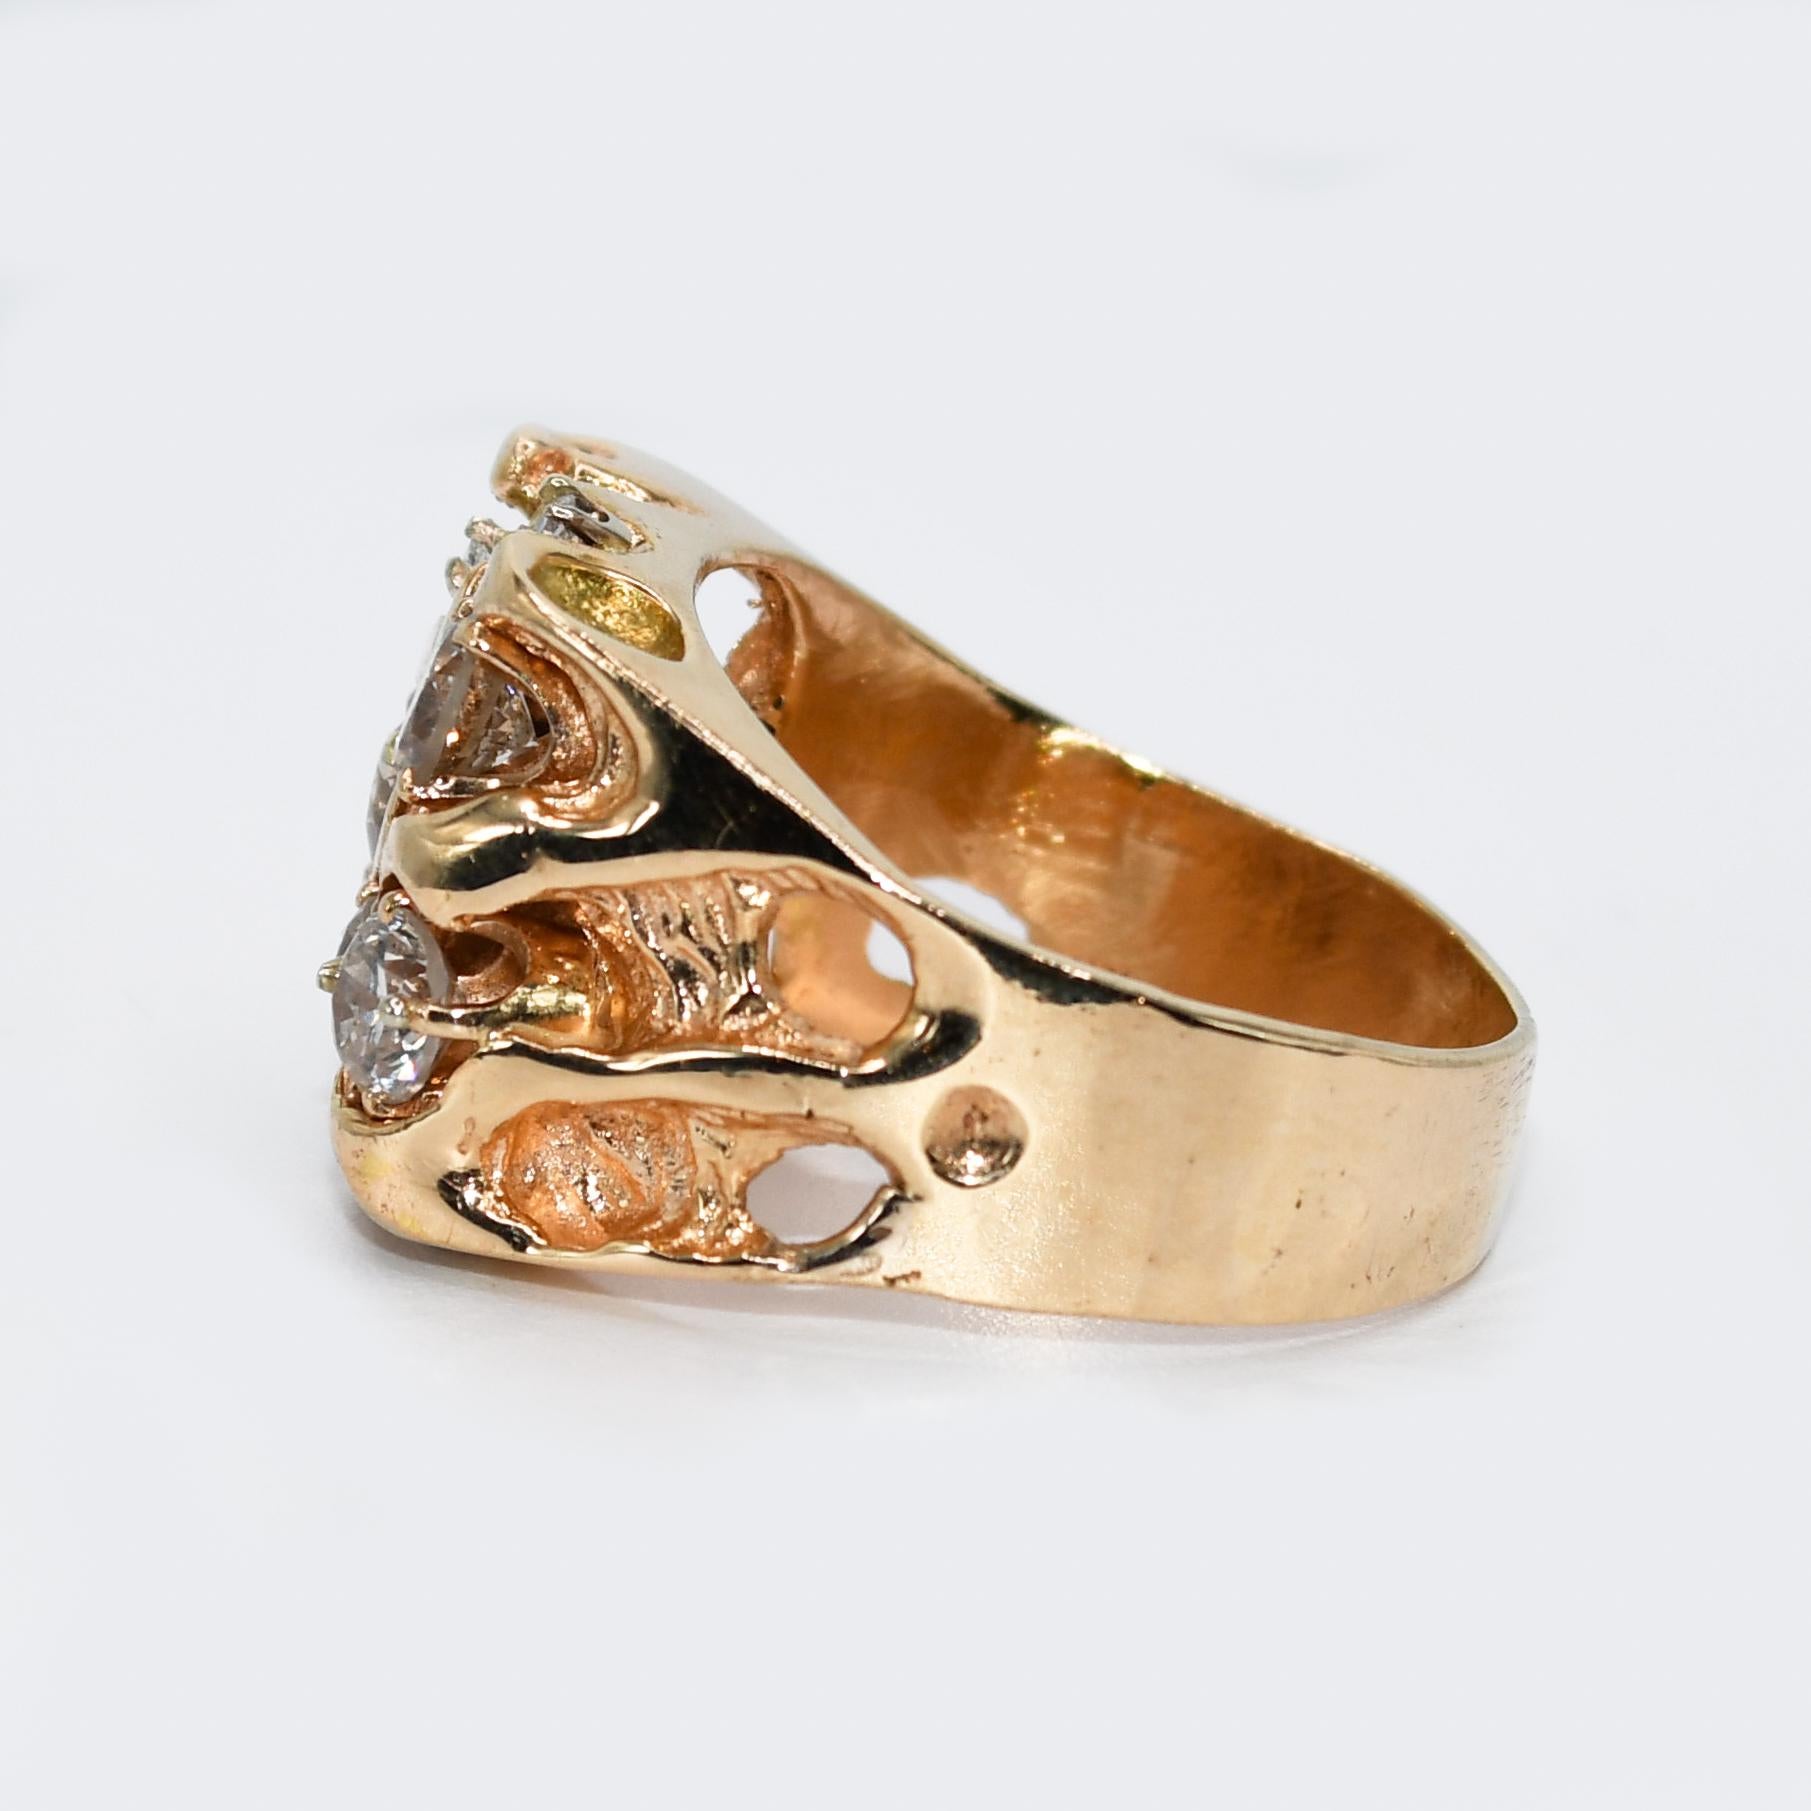 14K Yellow Gold Diamond Ring Nugget Style, 1.50tdw, 19.6g In Excellent Condition For Sale In Laguna Beach, CA